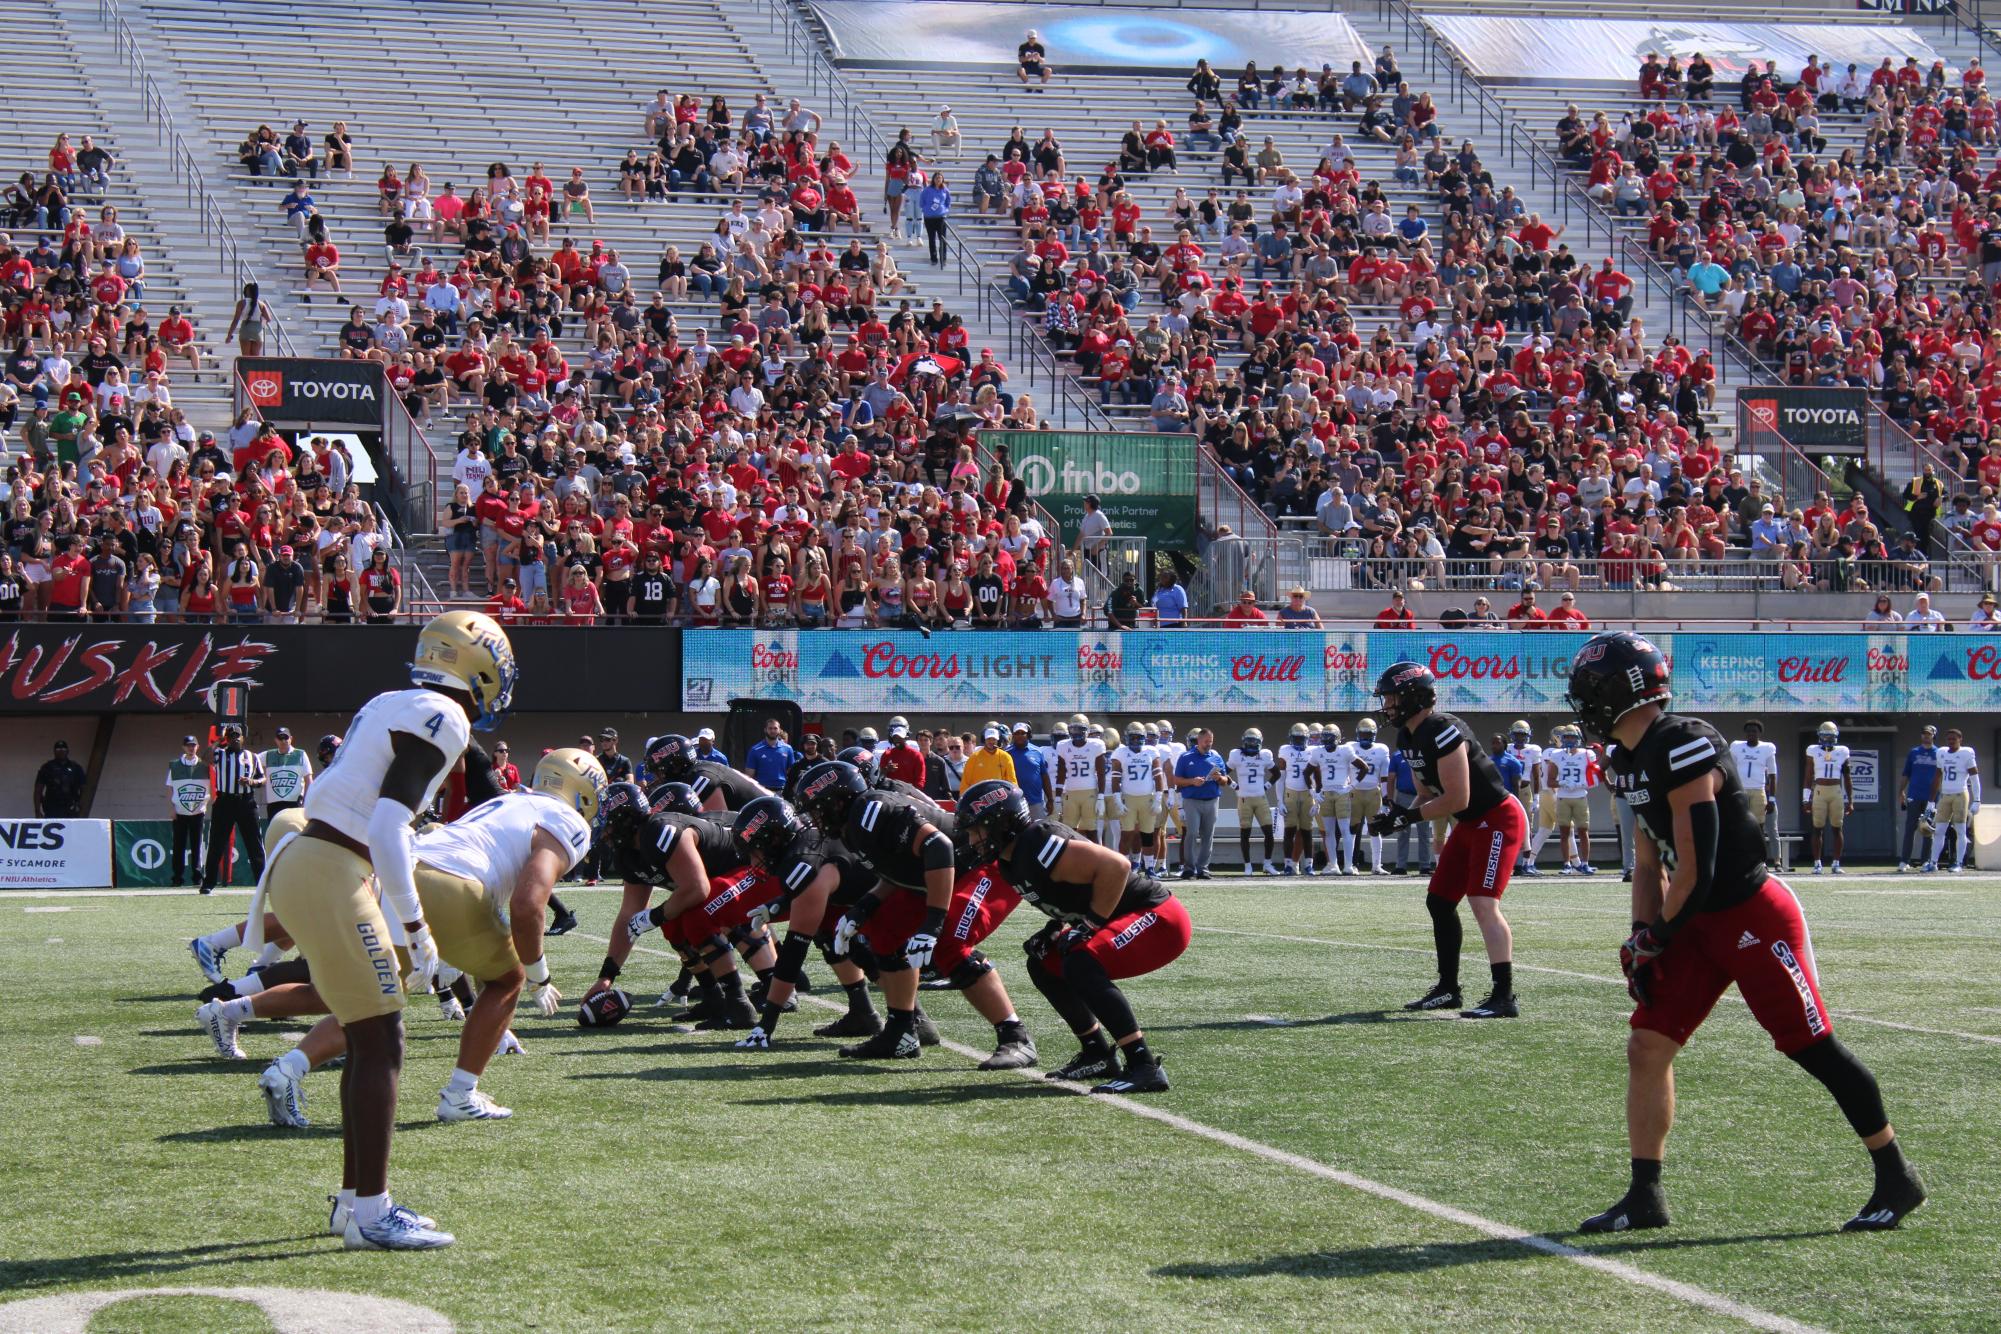 NIU offensive line sets against Tulsa defensive line during Saturdays game at the Huskie Stadium. On Saturday, the Huskies were defeated by Tulsa 22-14. (Cameron Whittington | Northern Star)